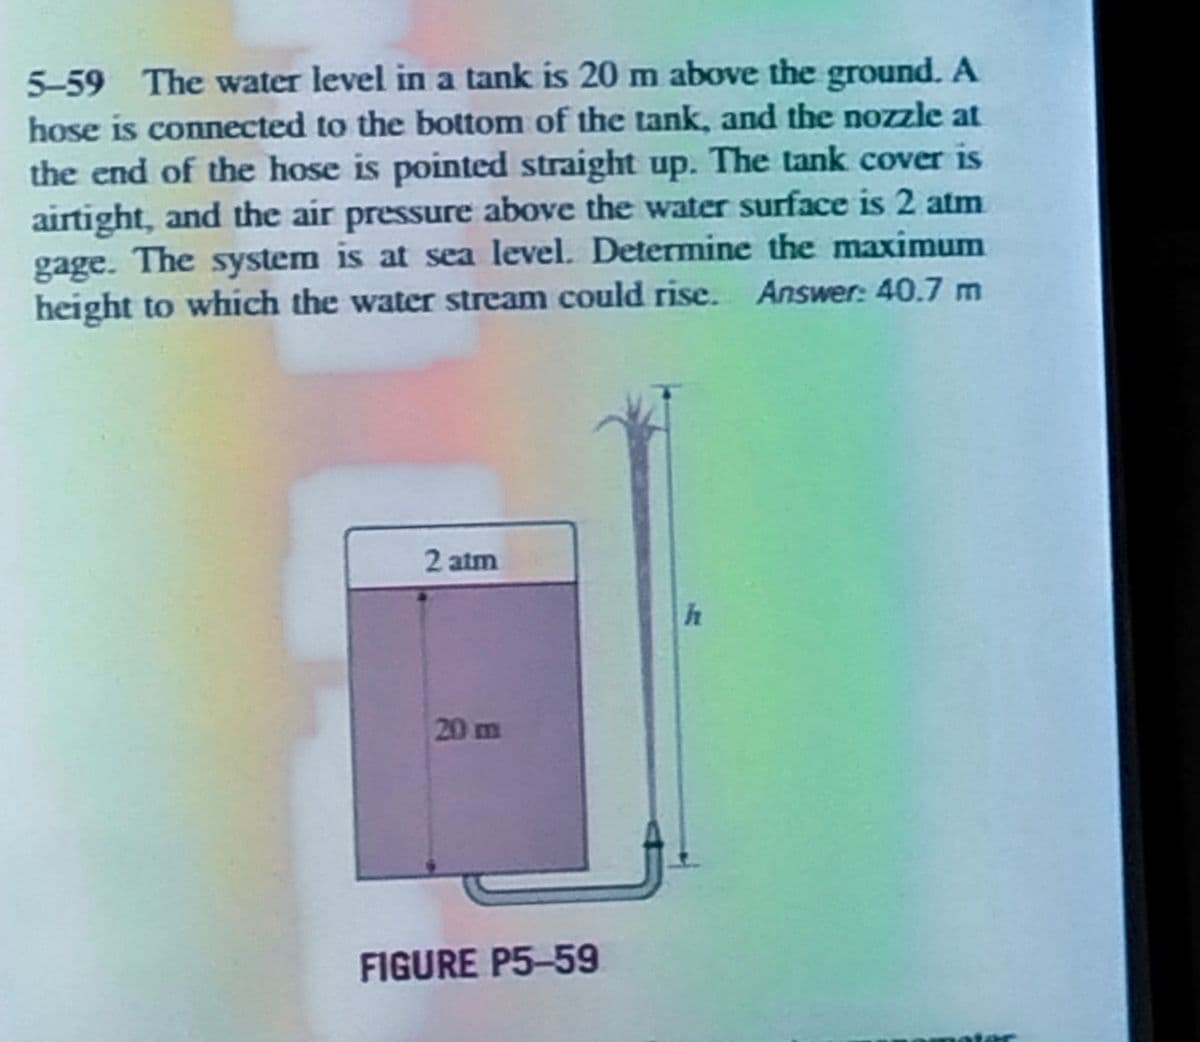 5-59 The water level in a tank is 20 m above the ground. A
hose is connected to the bottom of the tank, and the nozzle at
the end of the hose is pointed straight up. The tank cover is
airtight, and the air pressure above the water surface is 2 atm
gage. The system is at sea level. Determine the maximum
height to which the water stream could rise. Answer: 40.7 m
2 atm
20 m
FIGURE P5-59
h